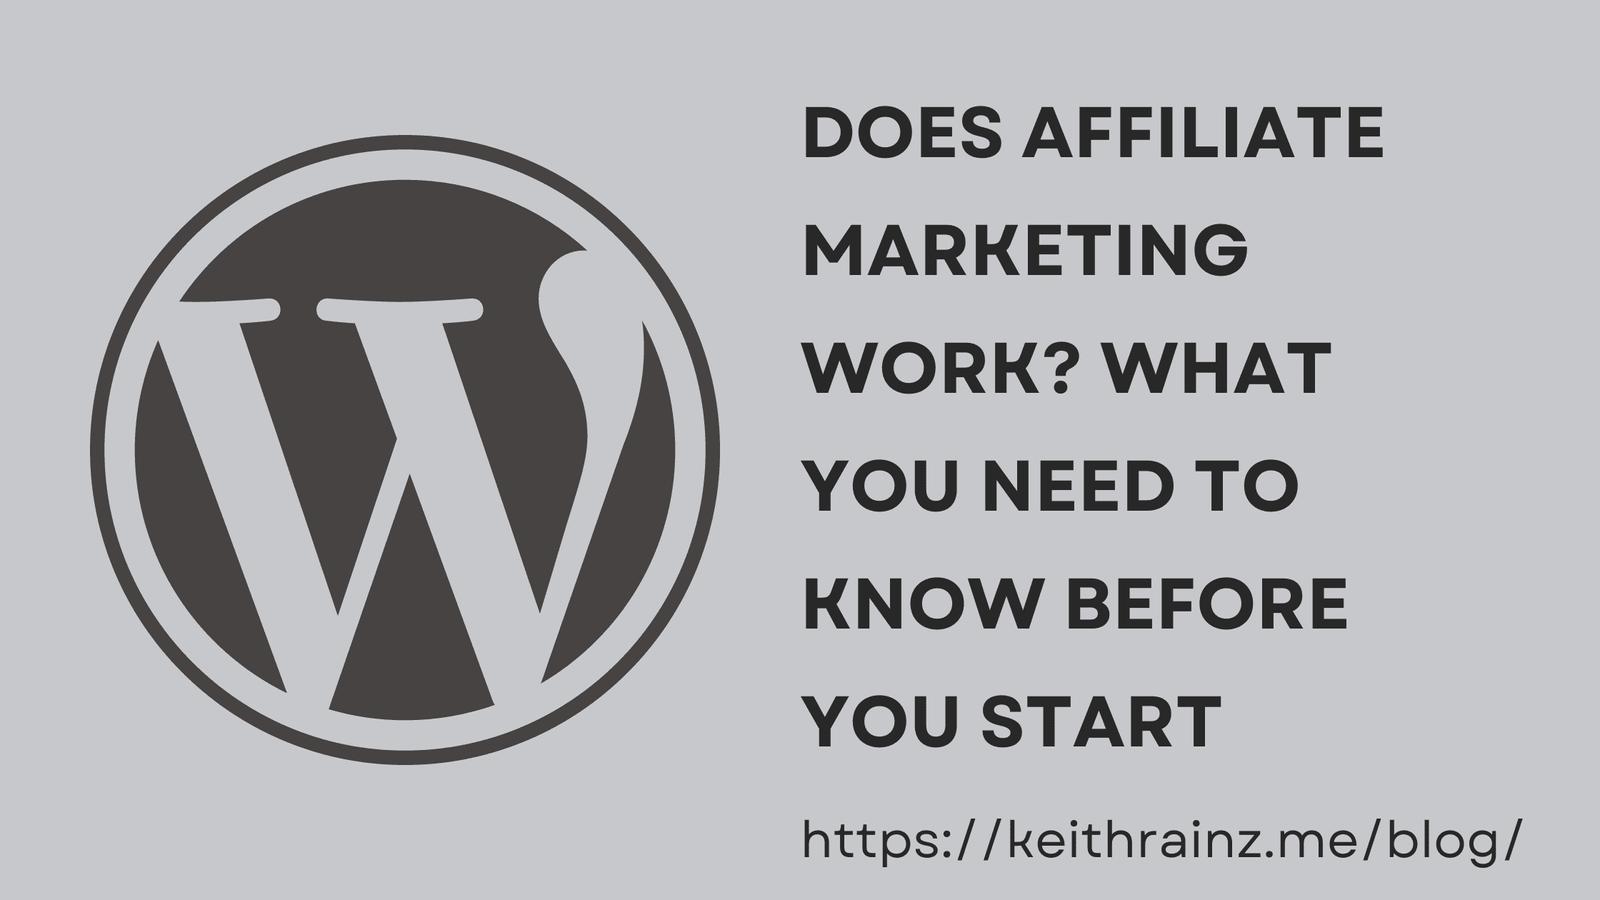 Does Affiliate Marketing Work What You Need to Know Before You Start